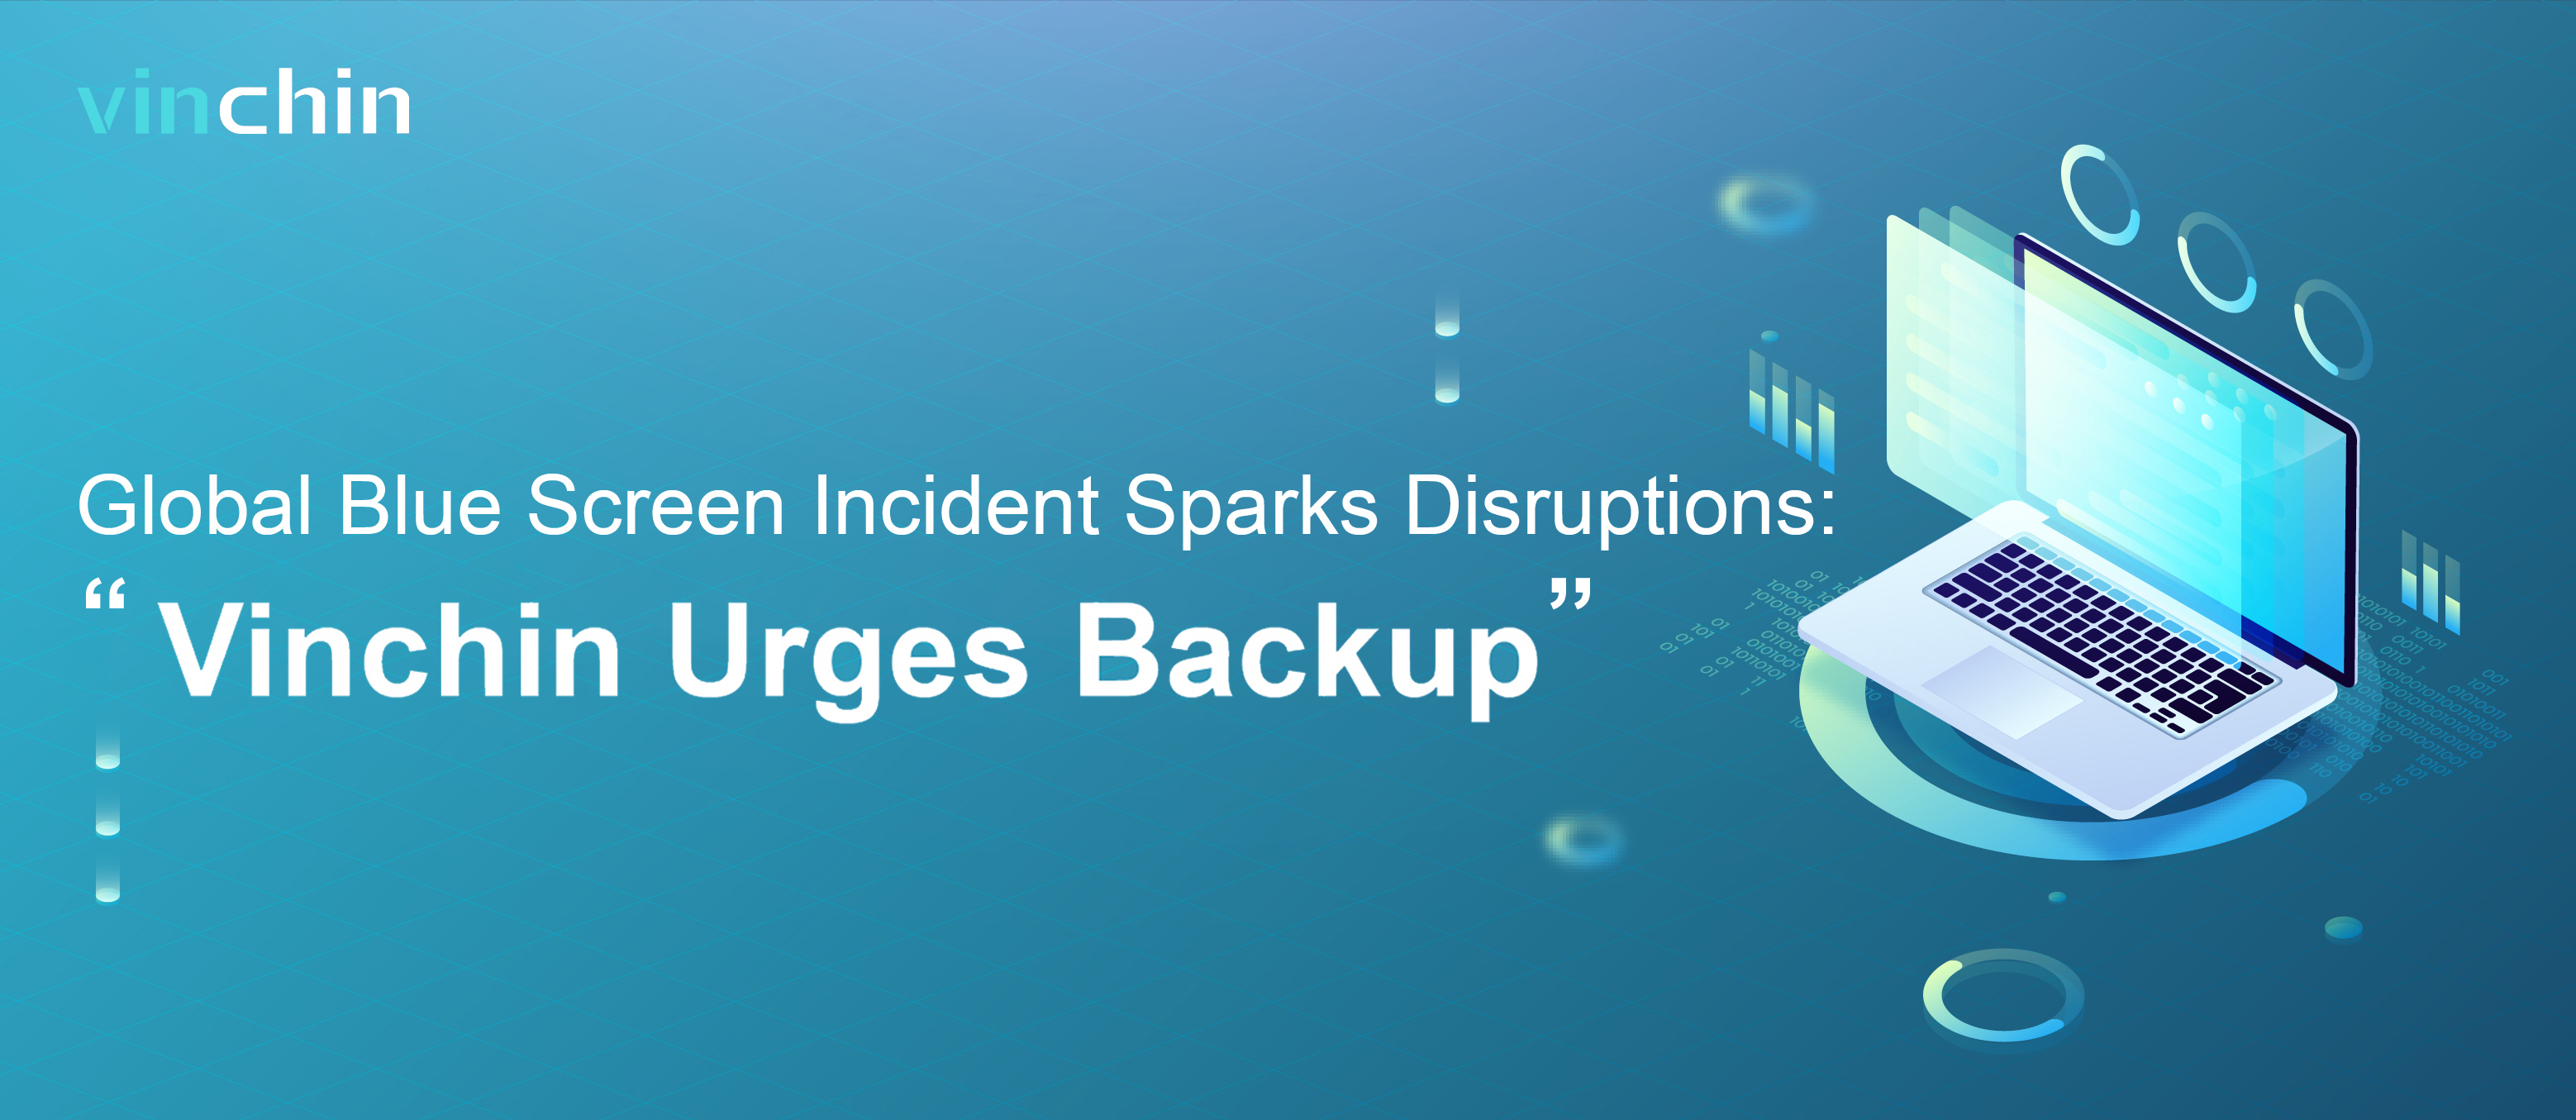 global-blue-screen-incident-causes-major-disruptions:-vinchin-emphasizes-urgent-importance-of-backup-solutions